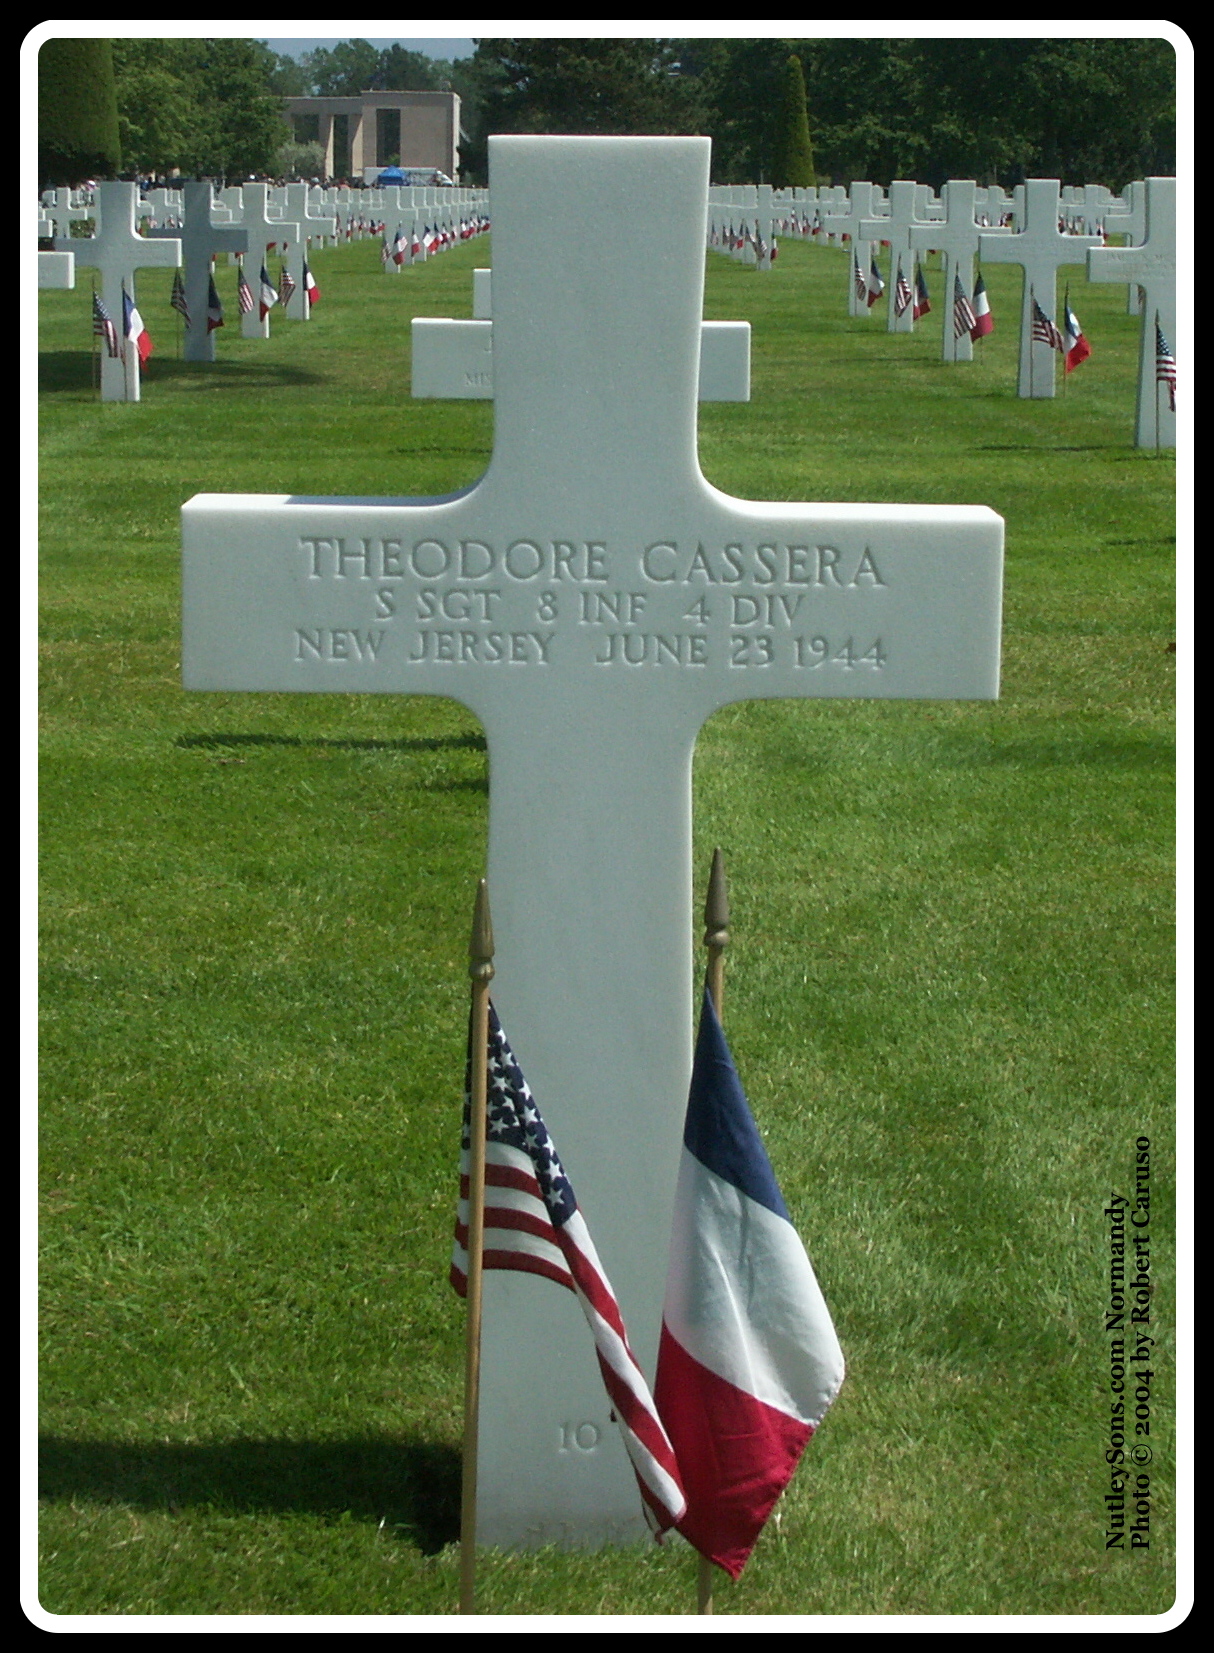 Normandy Photo Copyright  2004 by Robert Caruso, used by permission